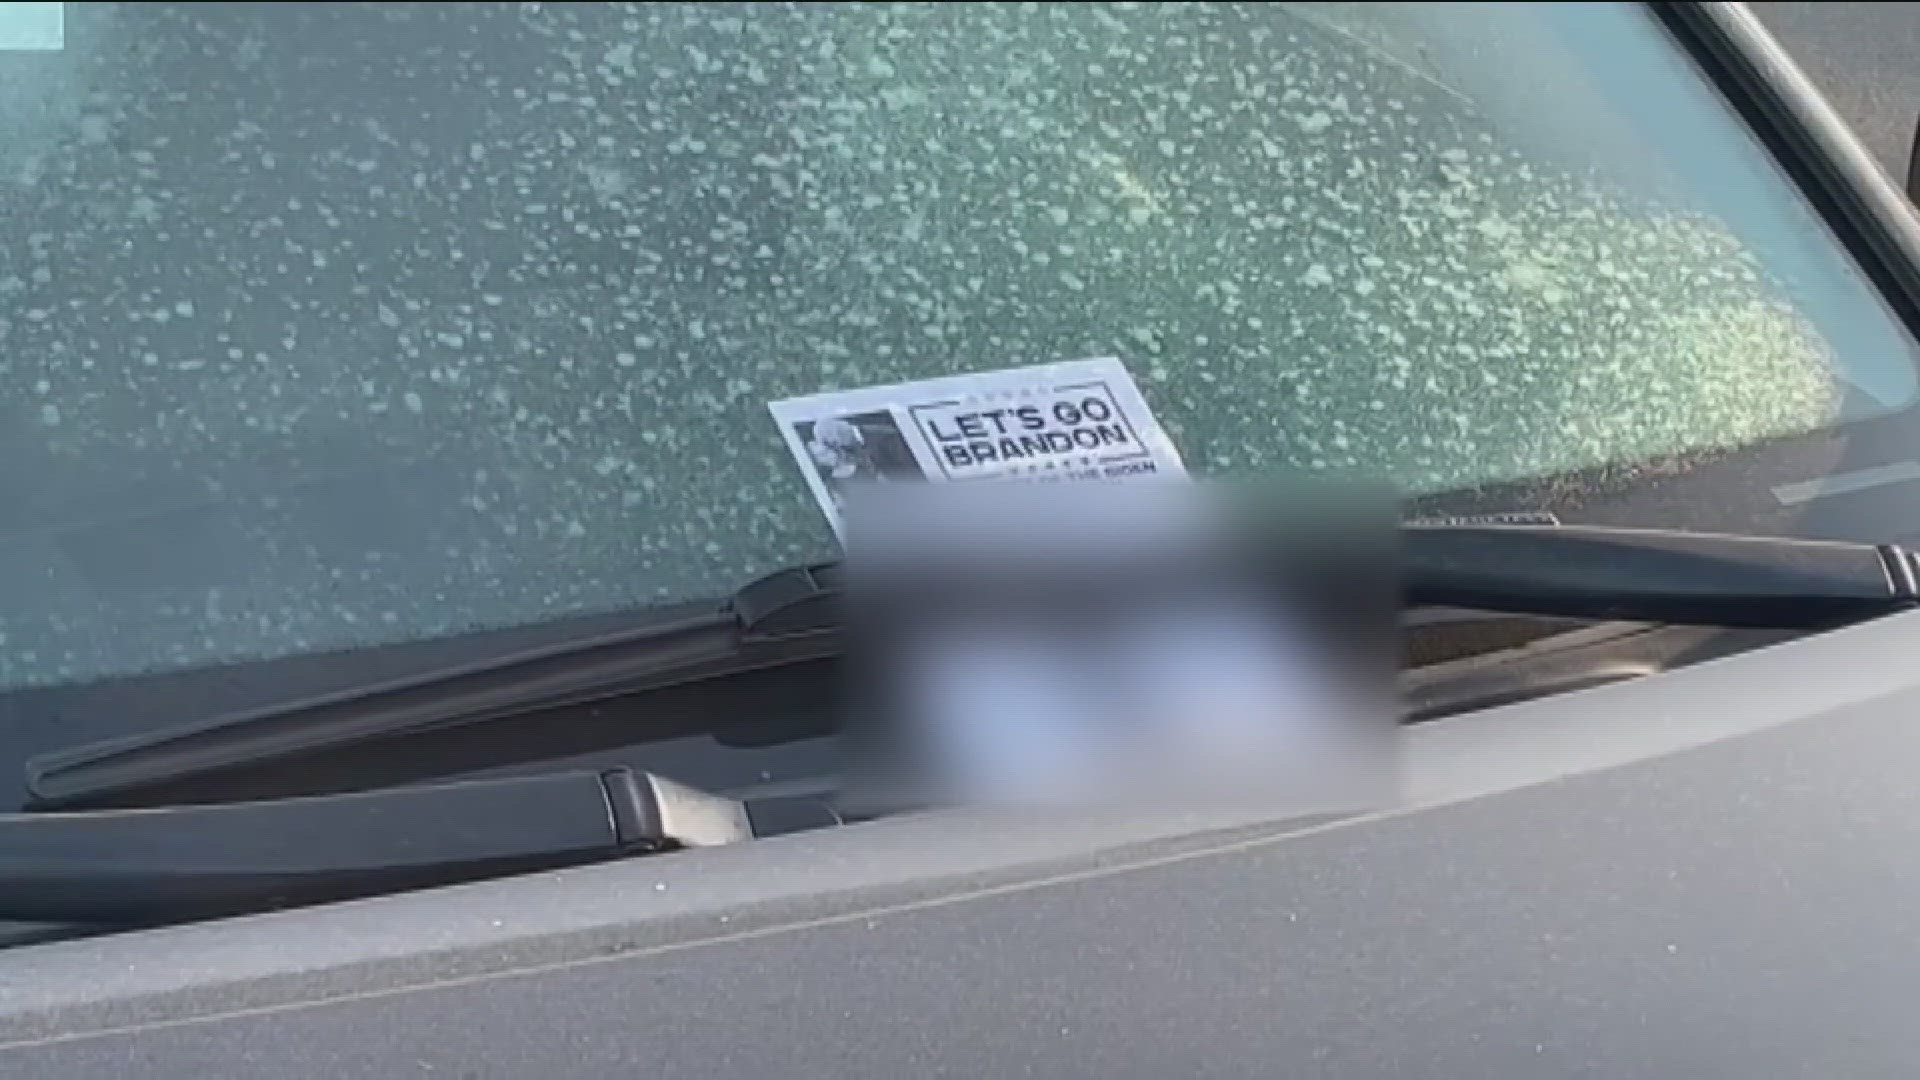 San Diego Police collected multiple flyers off car windshields Wednesday with Anti-Semitic messages.